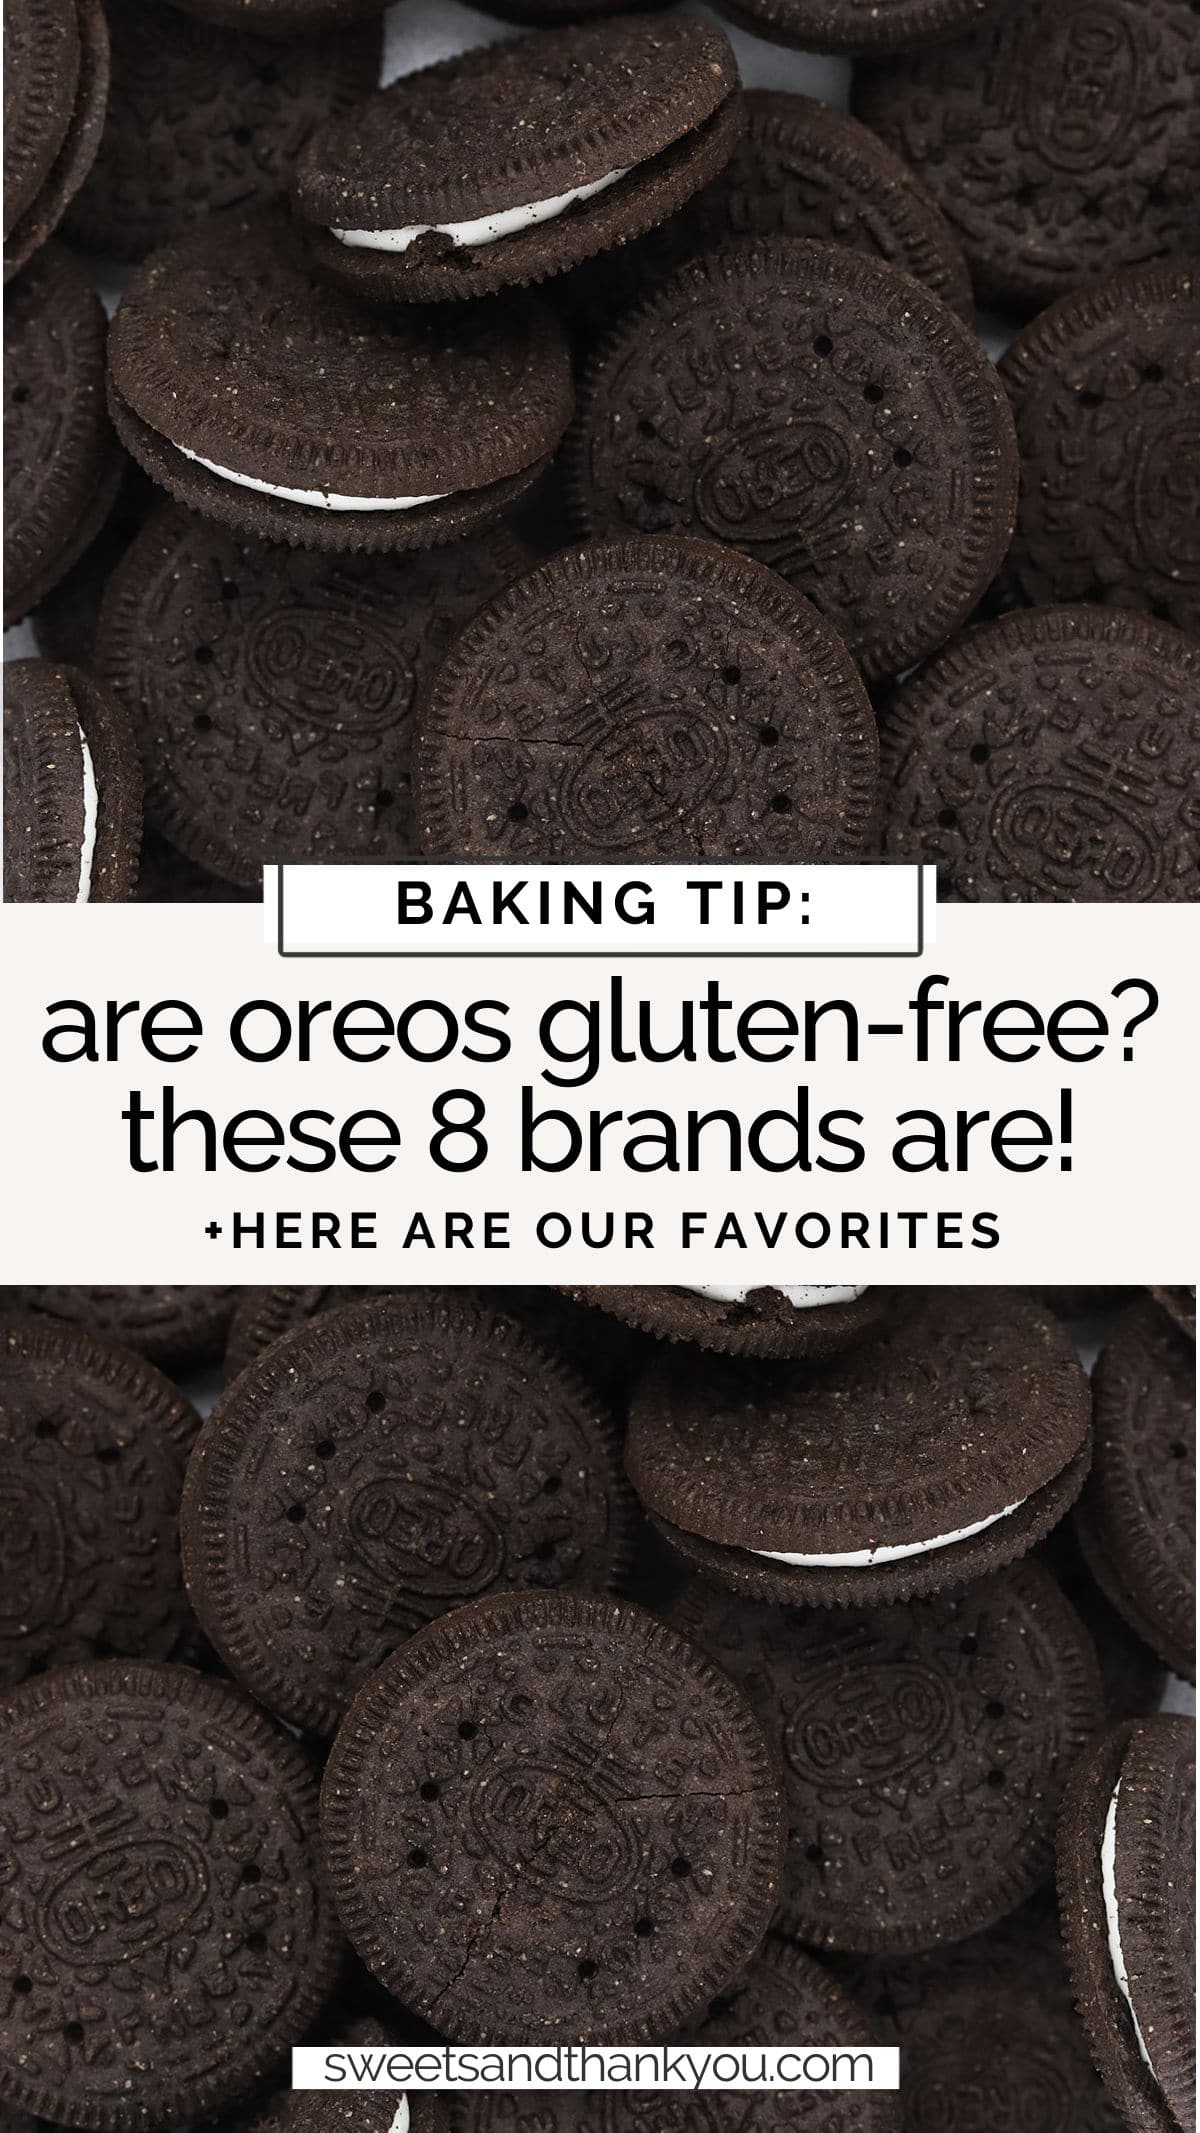 Here are 8 brands of gluten-free chocolate sandwich cookies next time you get the craving or need gluten-free Oreos for a recipe! // gluten free oreos // the best gluten-free oreos // gluten free oreo taste test // gluten-free cookies // gluten-free sandwich cookies // are oreos gluten-free // are there gluten-free oreos // gluten-free oreo substitutes //